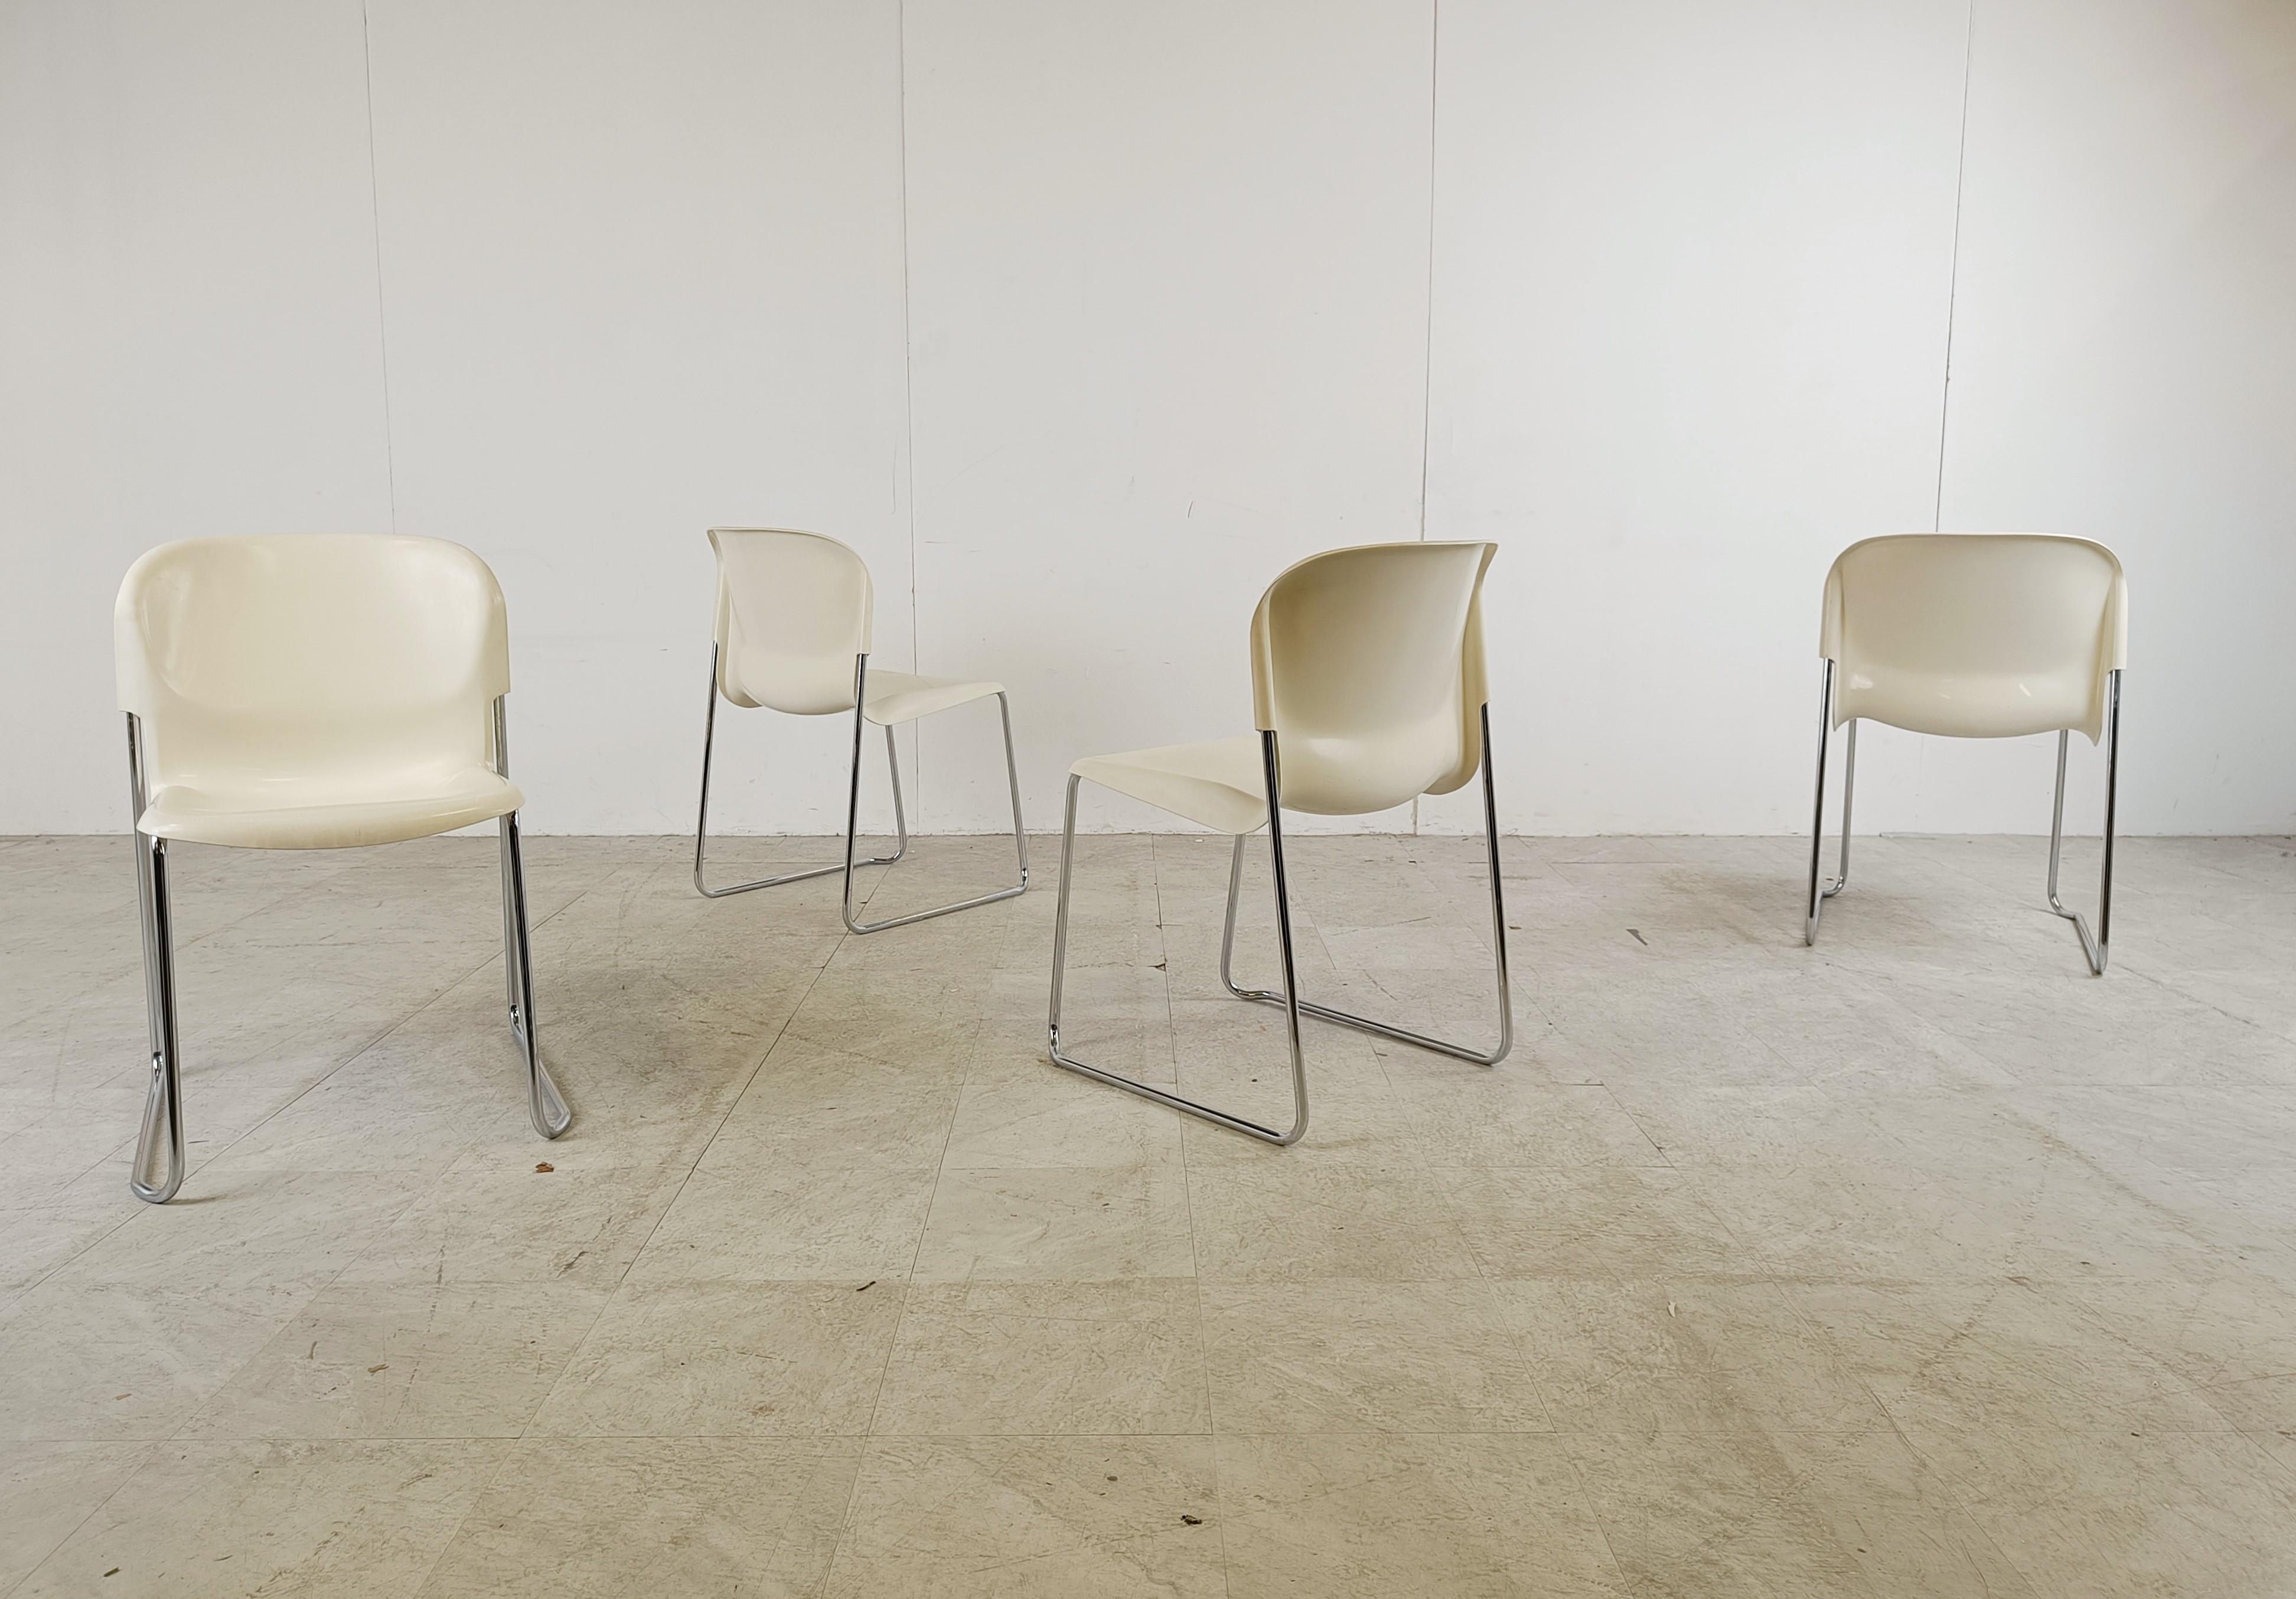 Metal Vintage Drabert SM400 stacking chairs by Gerd Lange, 1980s For Sale